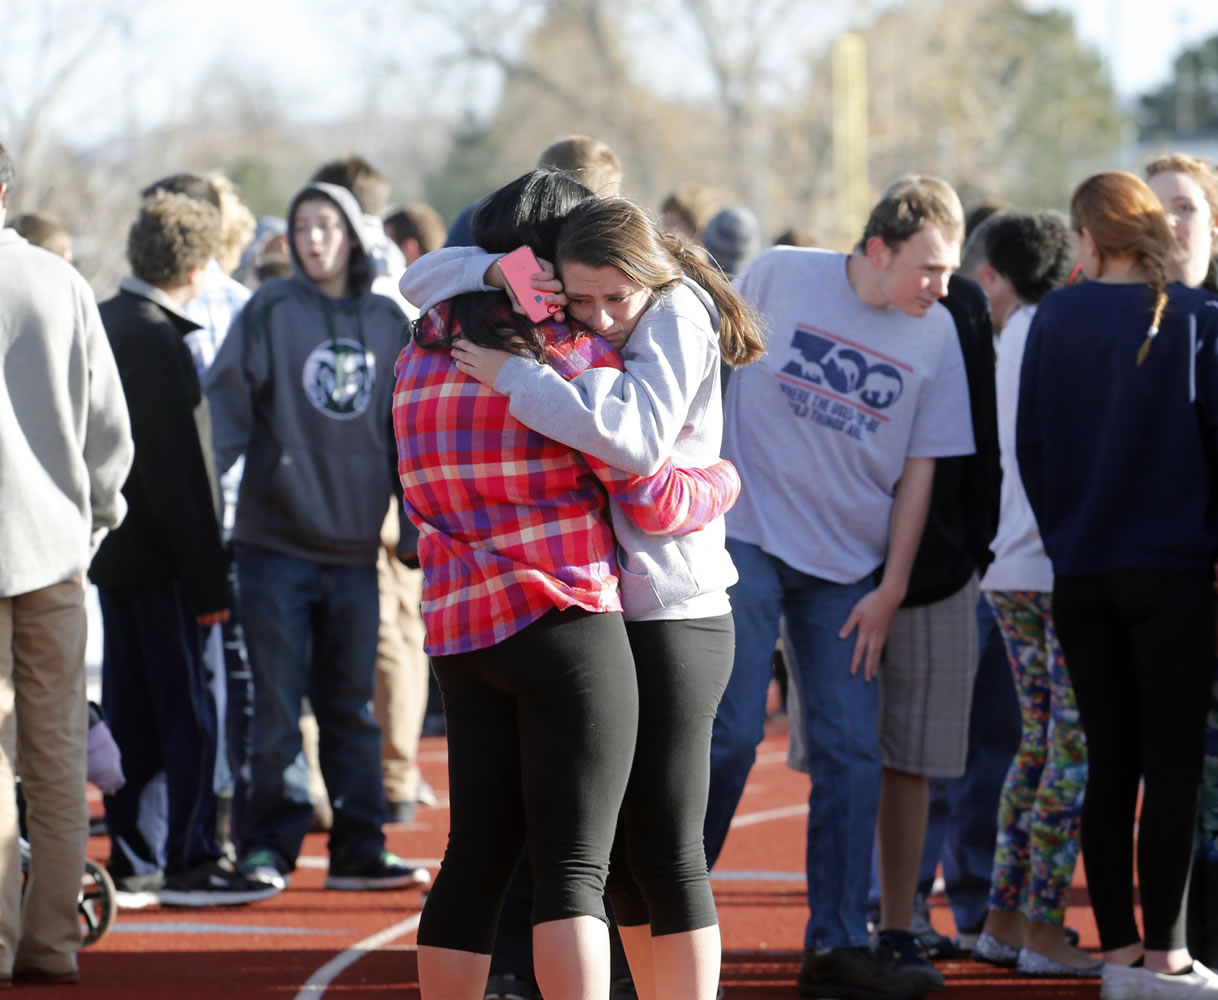 Students comfort each other at Arapahoe High School in Centennial, Colo., on Friday at a Colorado high school Friday after a shooter apparently killed himself, authorities said.